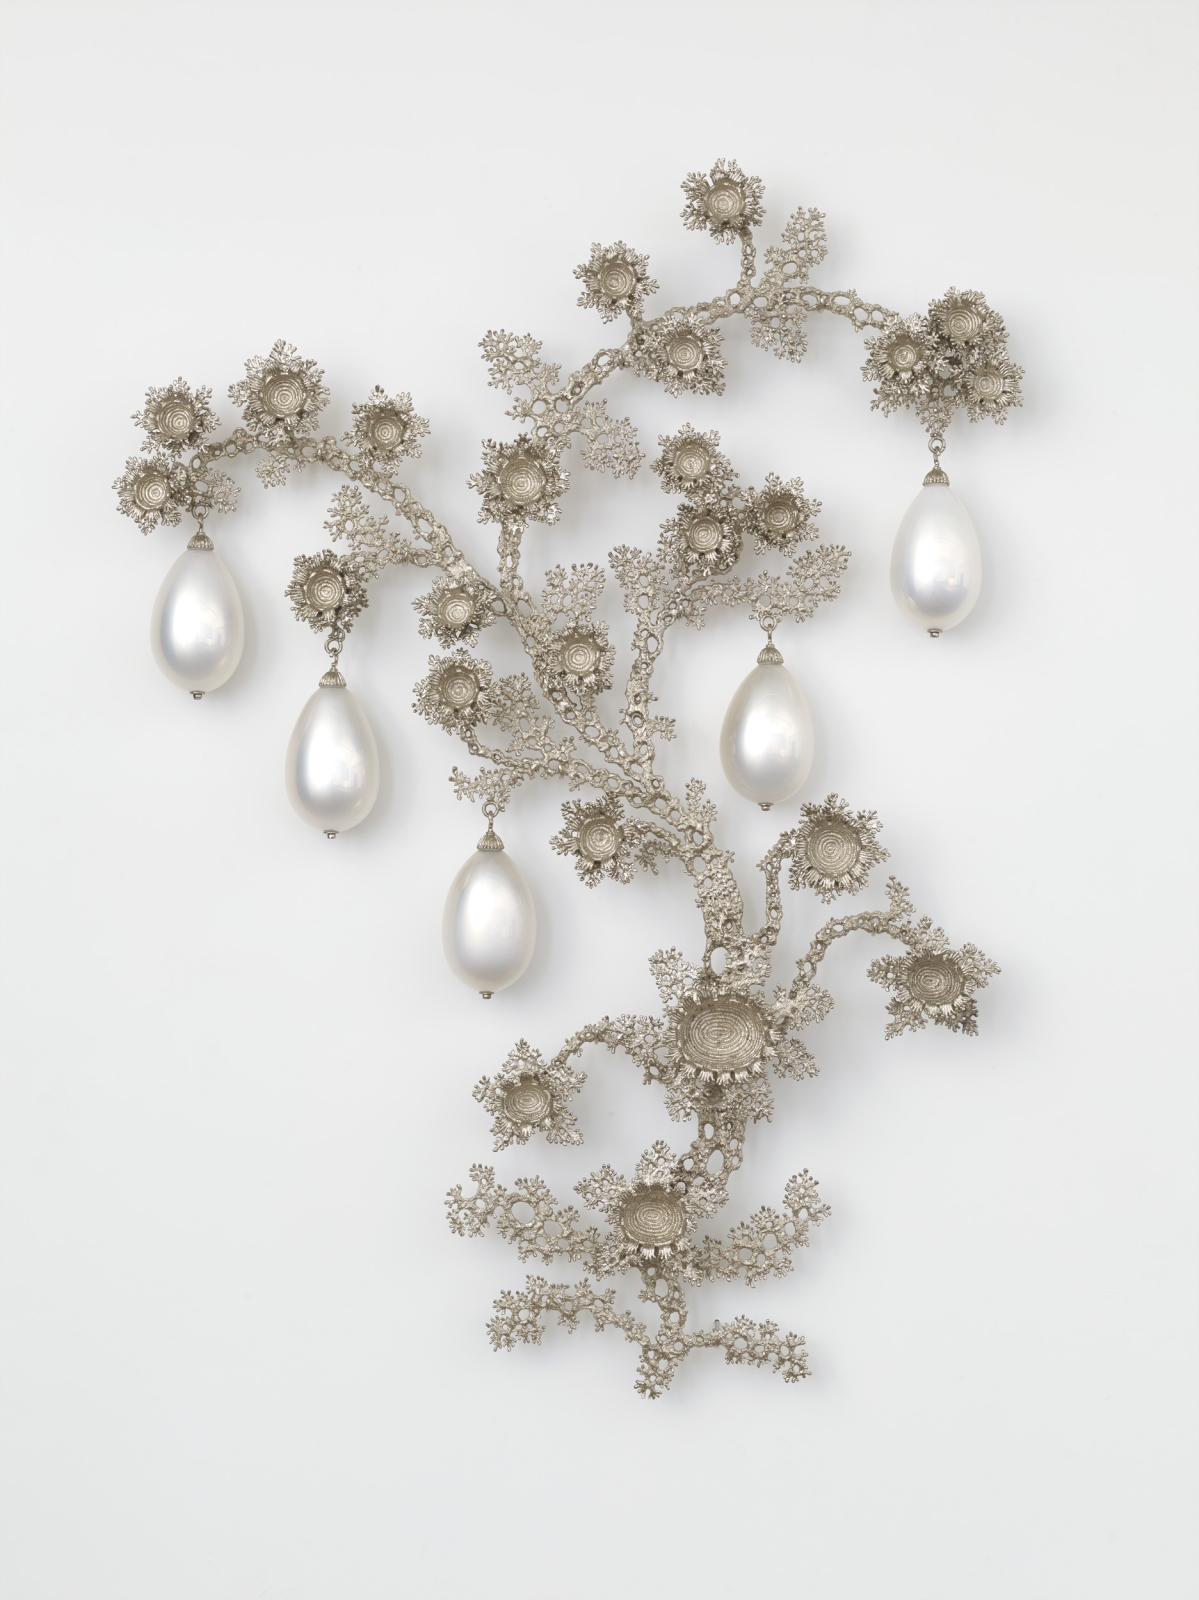 Timothy Horn
Tree of Heaven (lichen) IV, 2014
nickel-plated bronze, mirrored blown glass
80 x 60 x 8 in.
203.2 x 152.4 x 20.32 cm